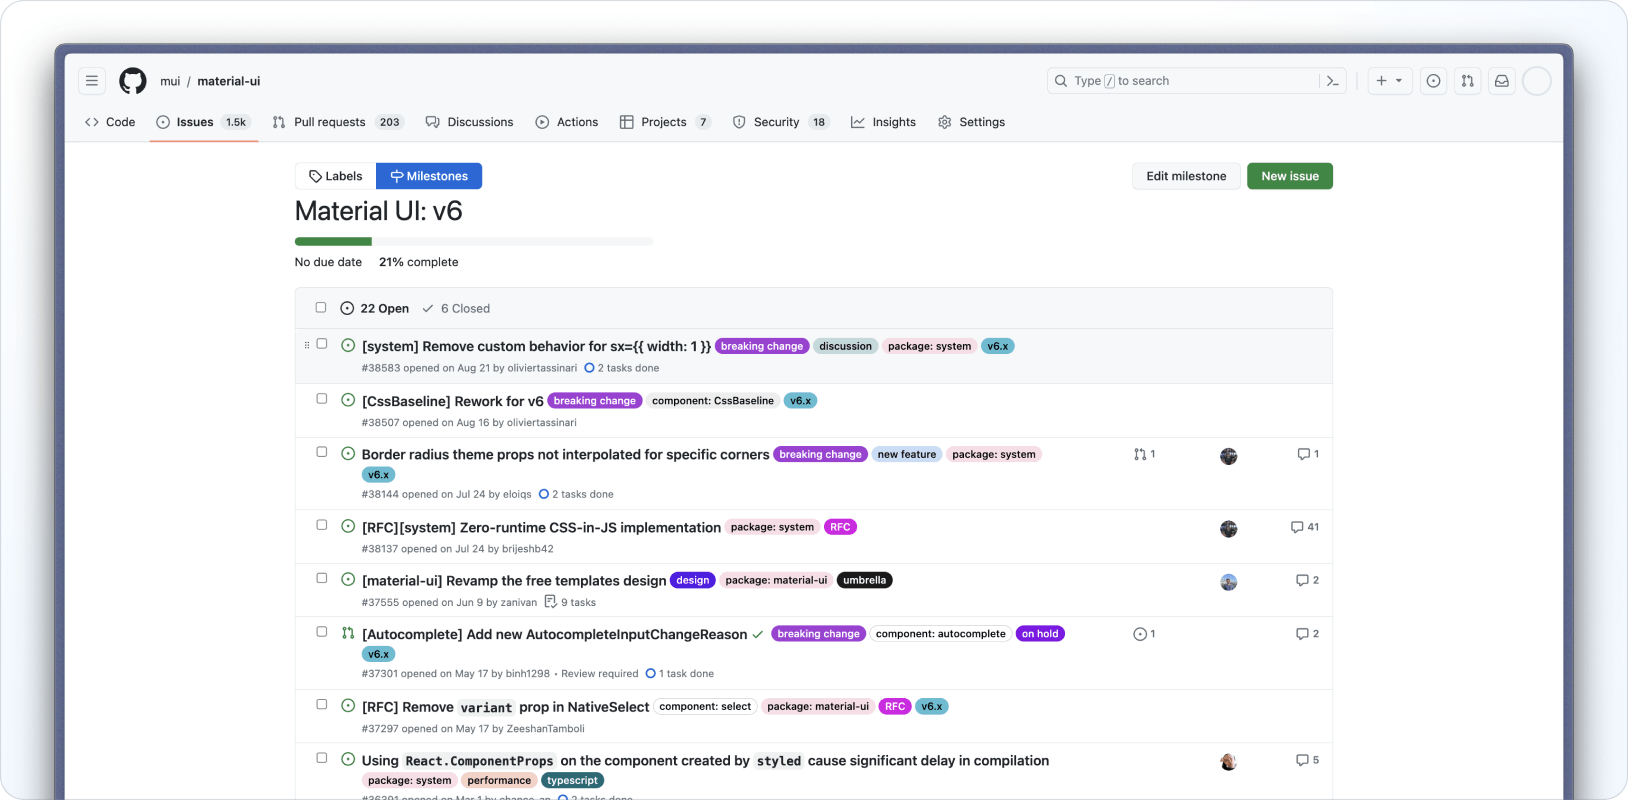 A screenshot from GitHub of the Material UI v6 milestone.